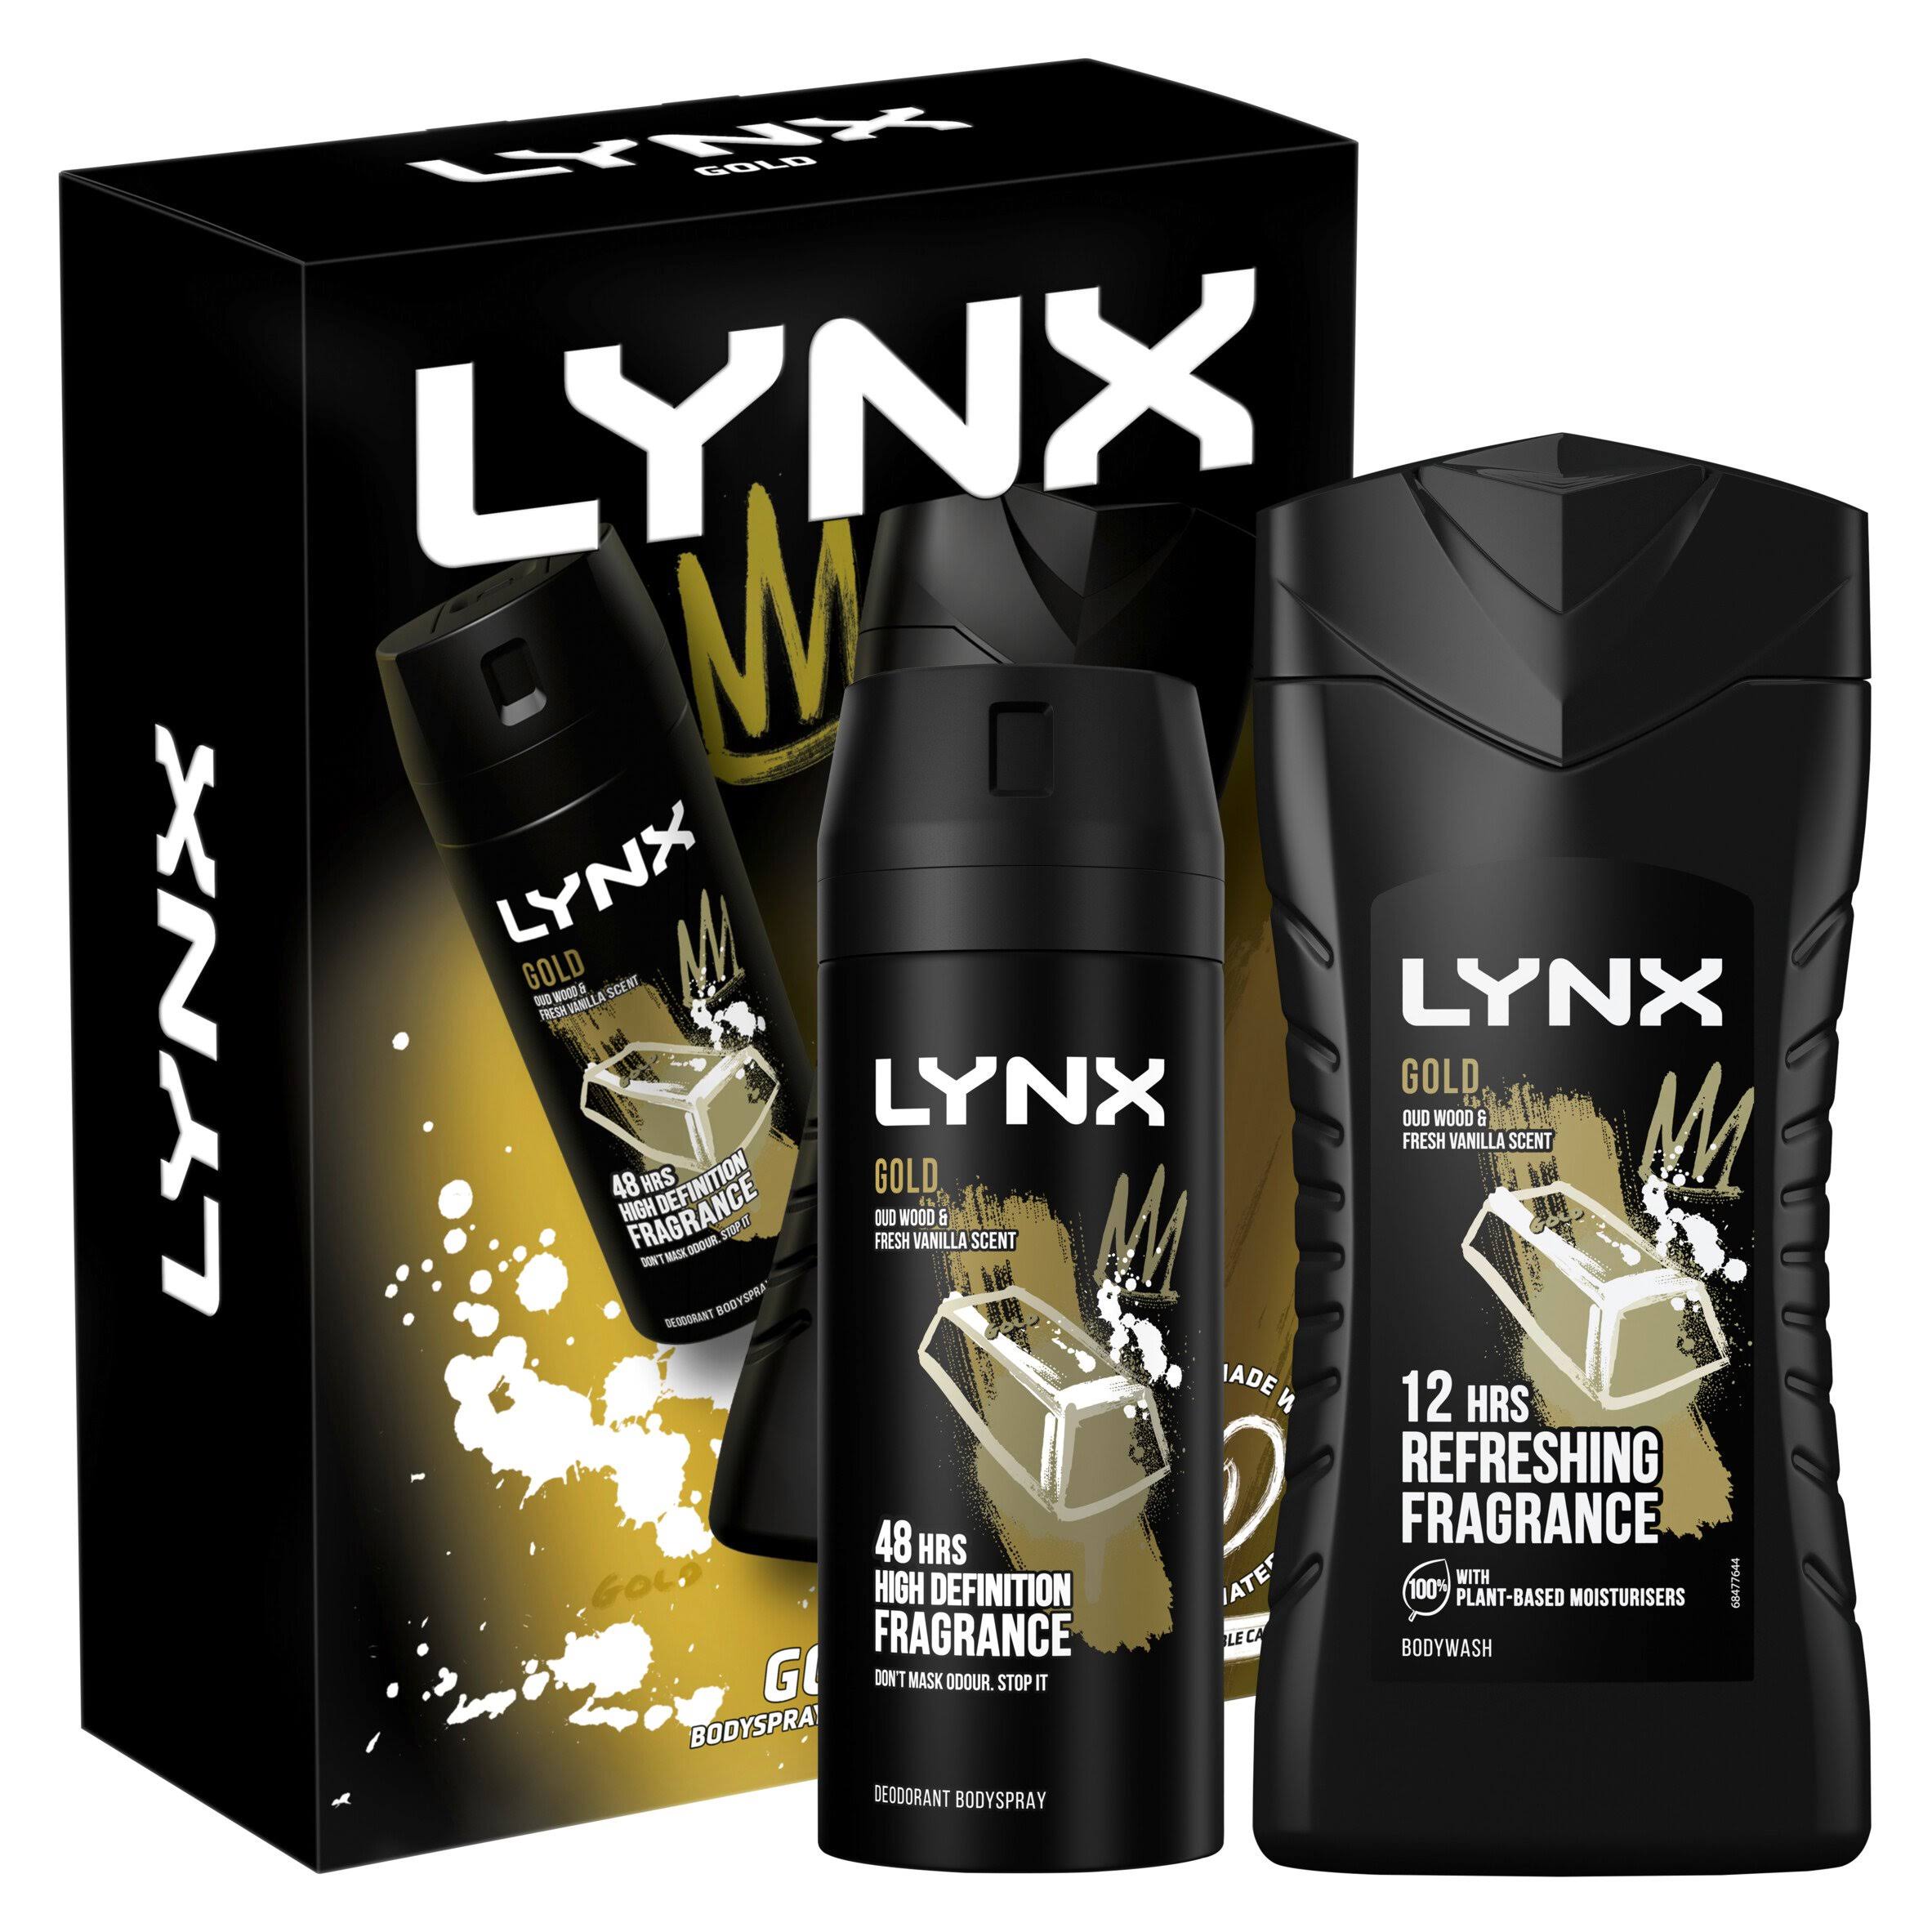 Lynx Gold Duo Giftset 2 Piece by dpharmacy